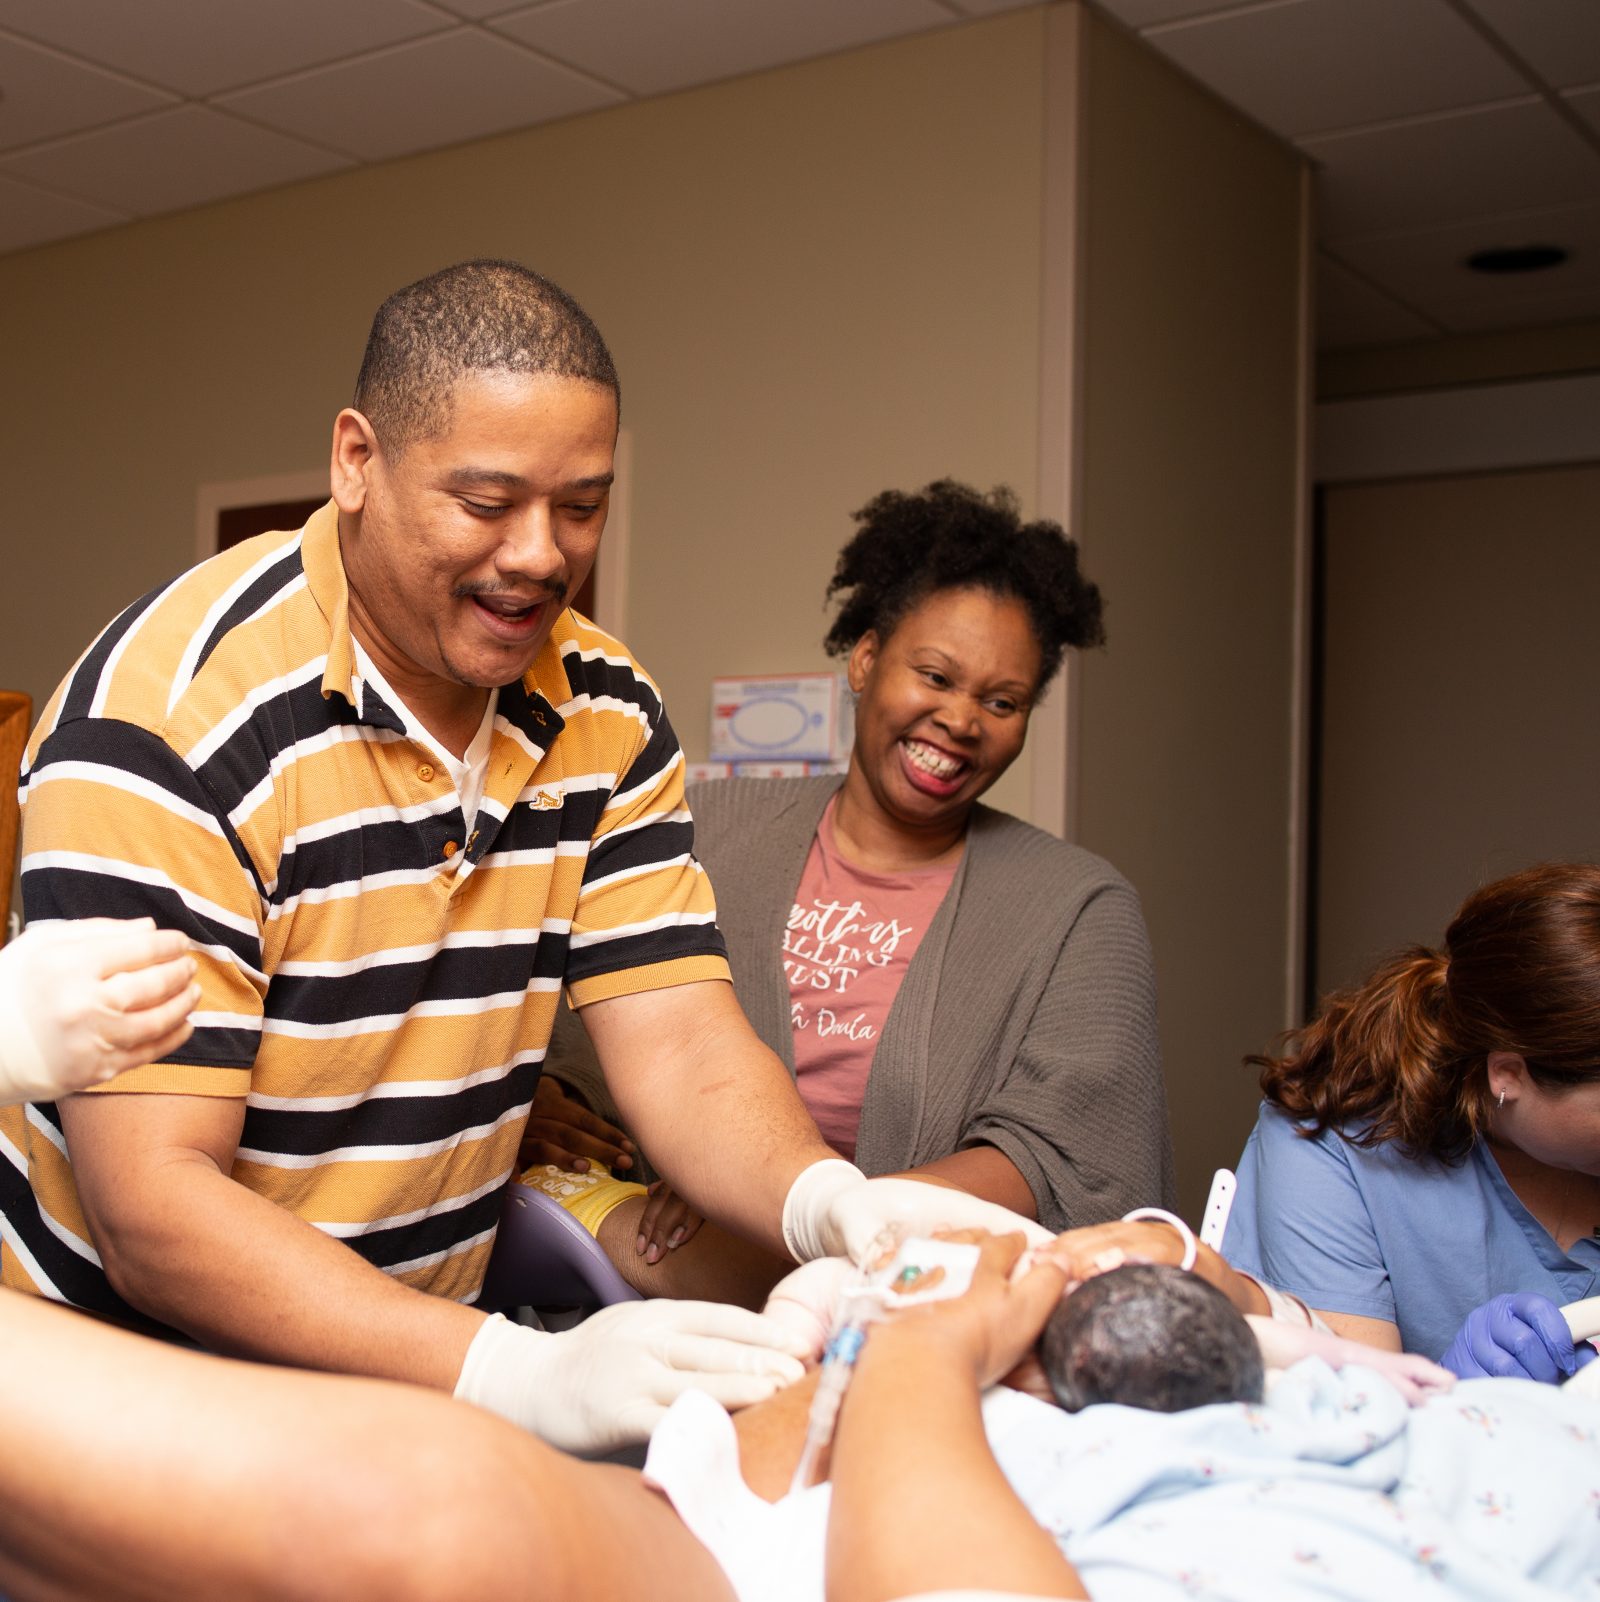 doula smiles as father helps deliver his baby